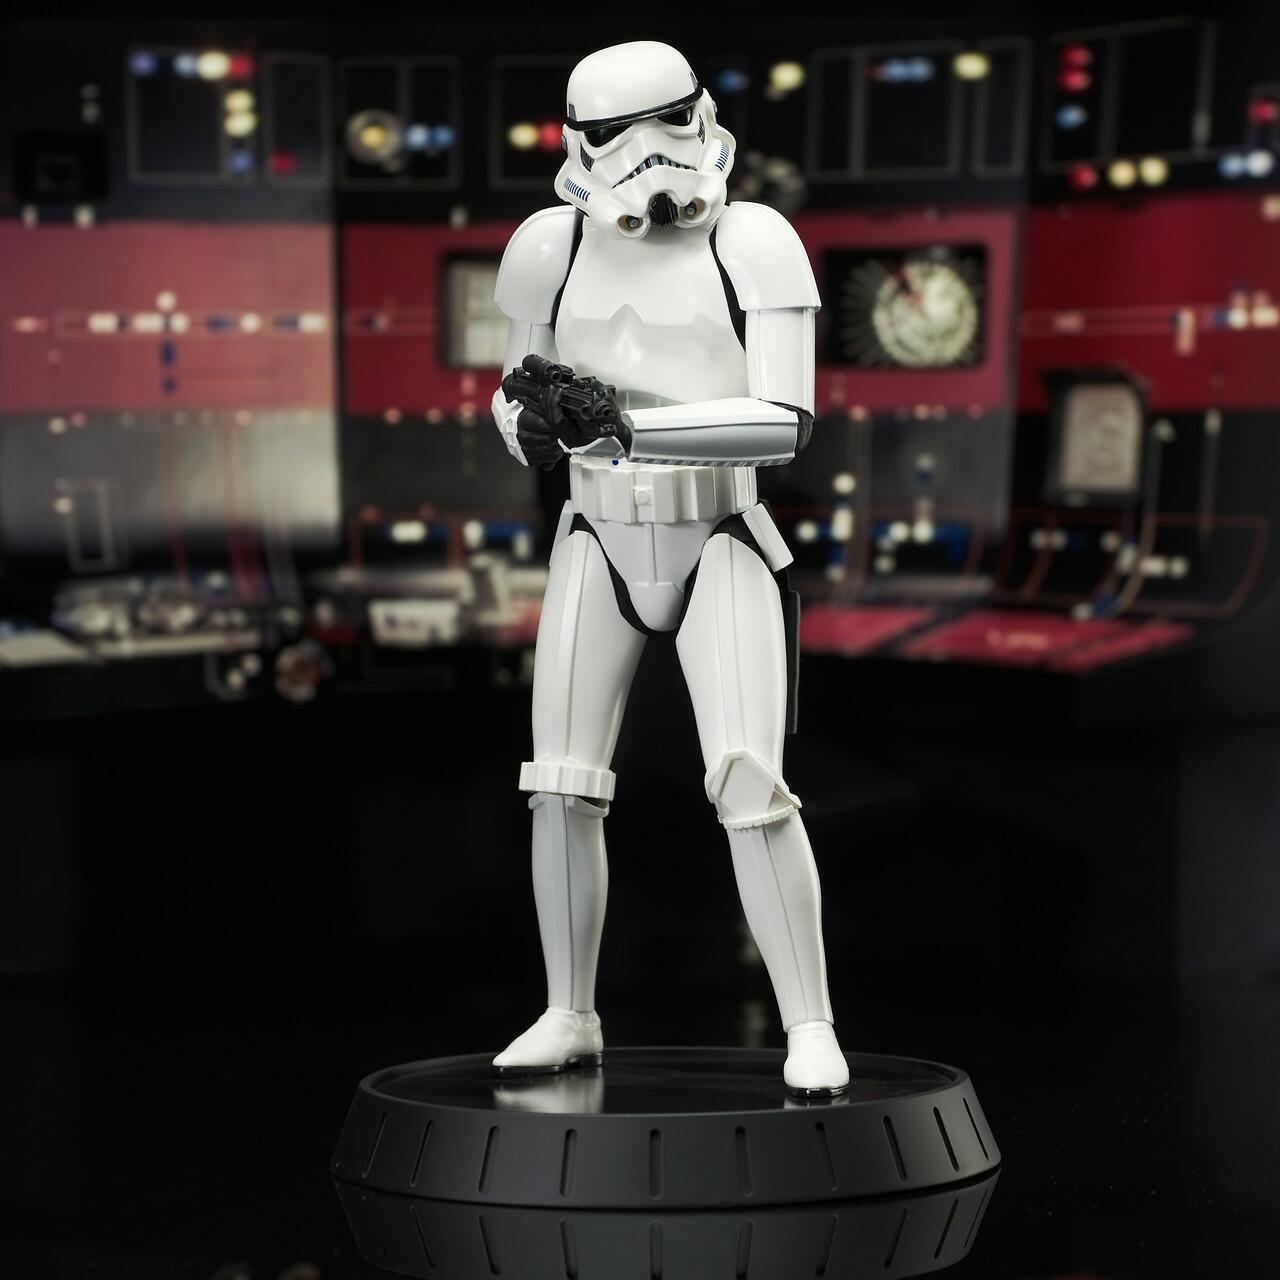 Gentle Giant - Star Wars A New Hope™ - Han Solo™ (In Stormtrooper Disguise) Milestones Statue - 40th Anniversary Exclusive (8423